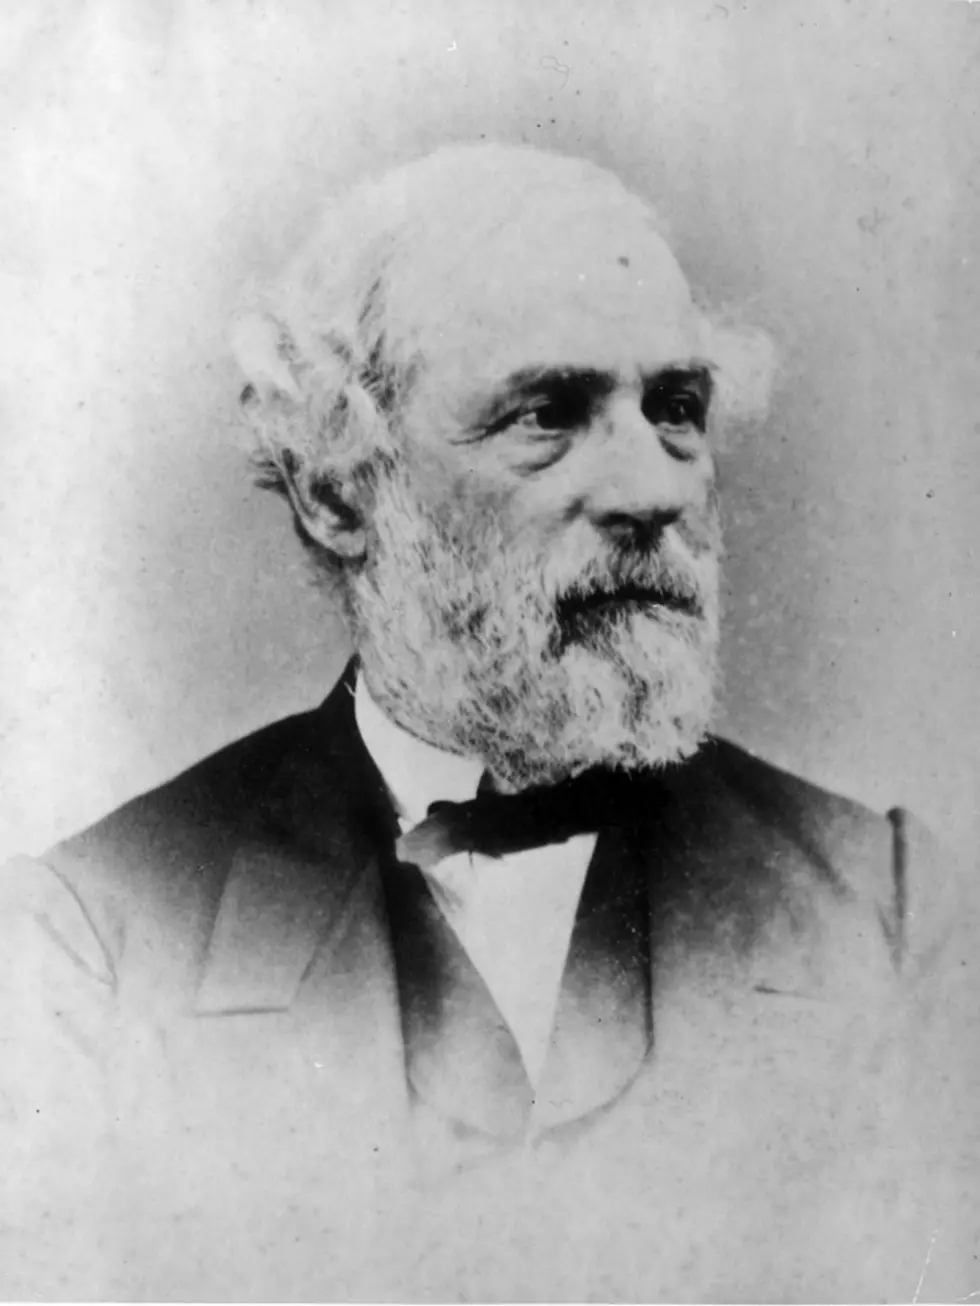 East Texans Calling For High School Named After Robert E. Lee To Be Renamed